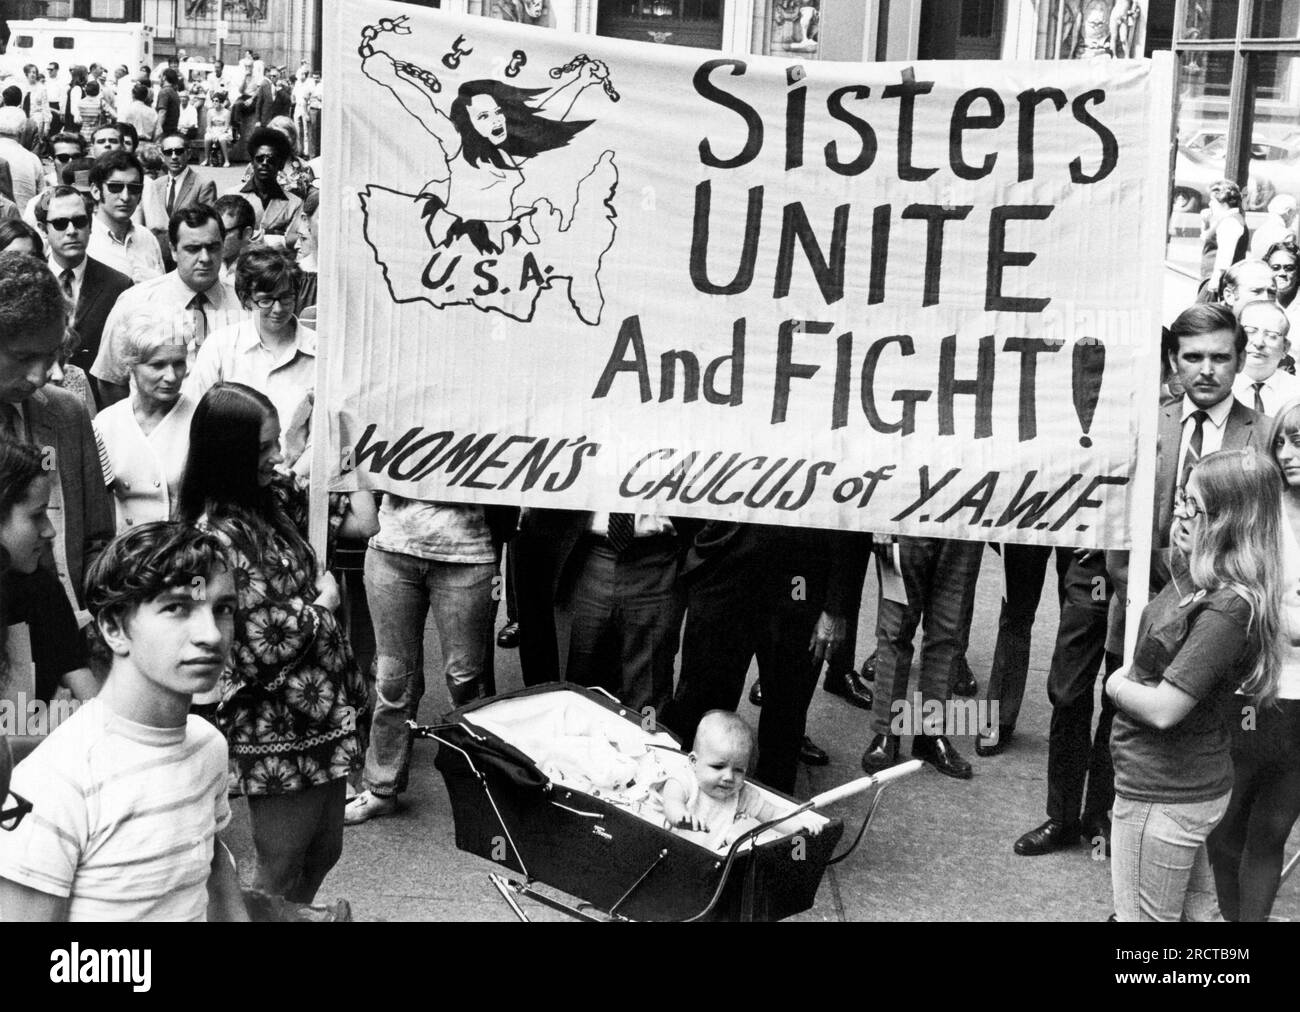 Chicago, Illinois:  August 26, 1970 The Women's Liberation movement mounted its strongest campaign for equal rights to date with over 4,000 persons turning out for the 50th anniversary of women's suffrage. The sign calls for The Women's Caucus of Youth Against War and Facism (YAWF) to unite and fight. Stock Photo